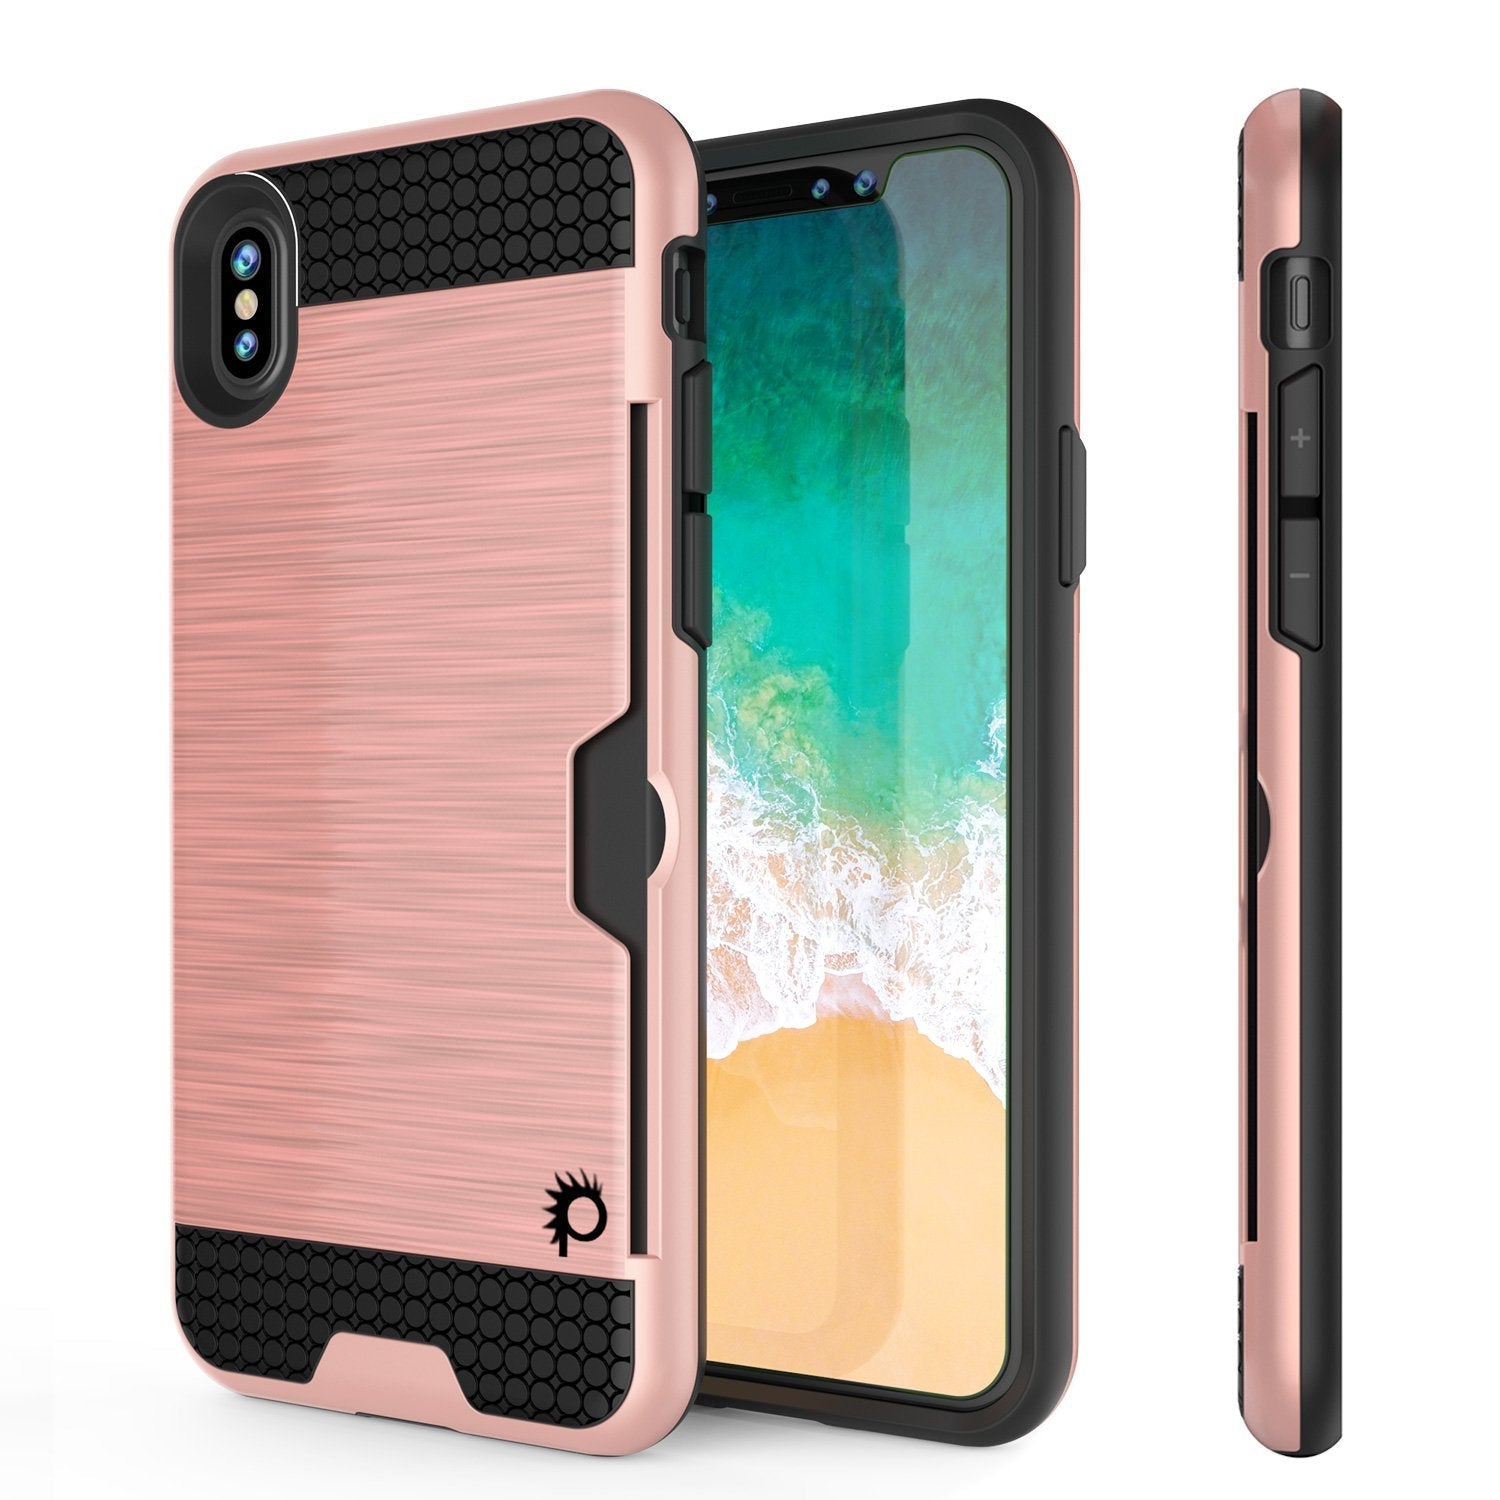 iPhone XS Max Case, PUNKcase [SLOT Series] Slim Fit Dual-Layer Armor Cover [Rose-Gold] (Color in image: Rose Gold)